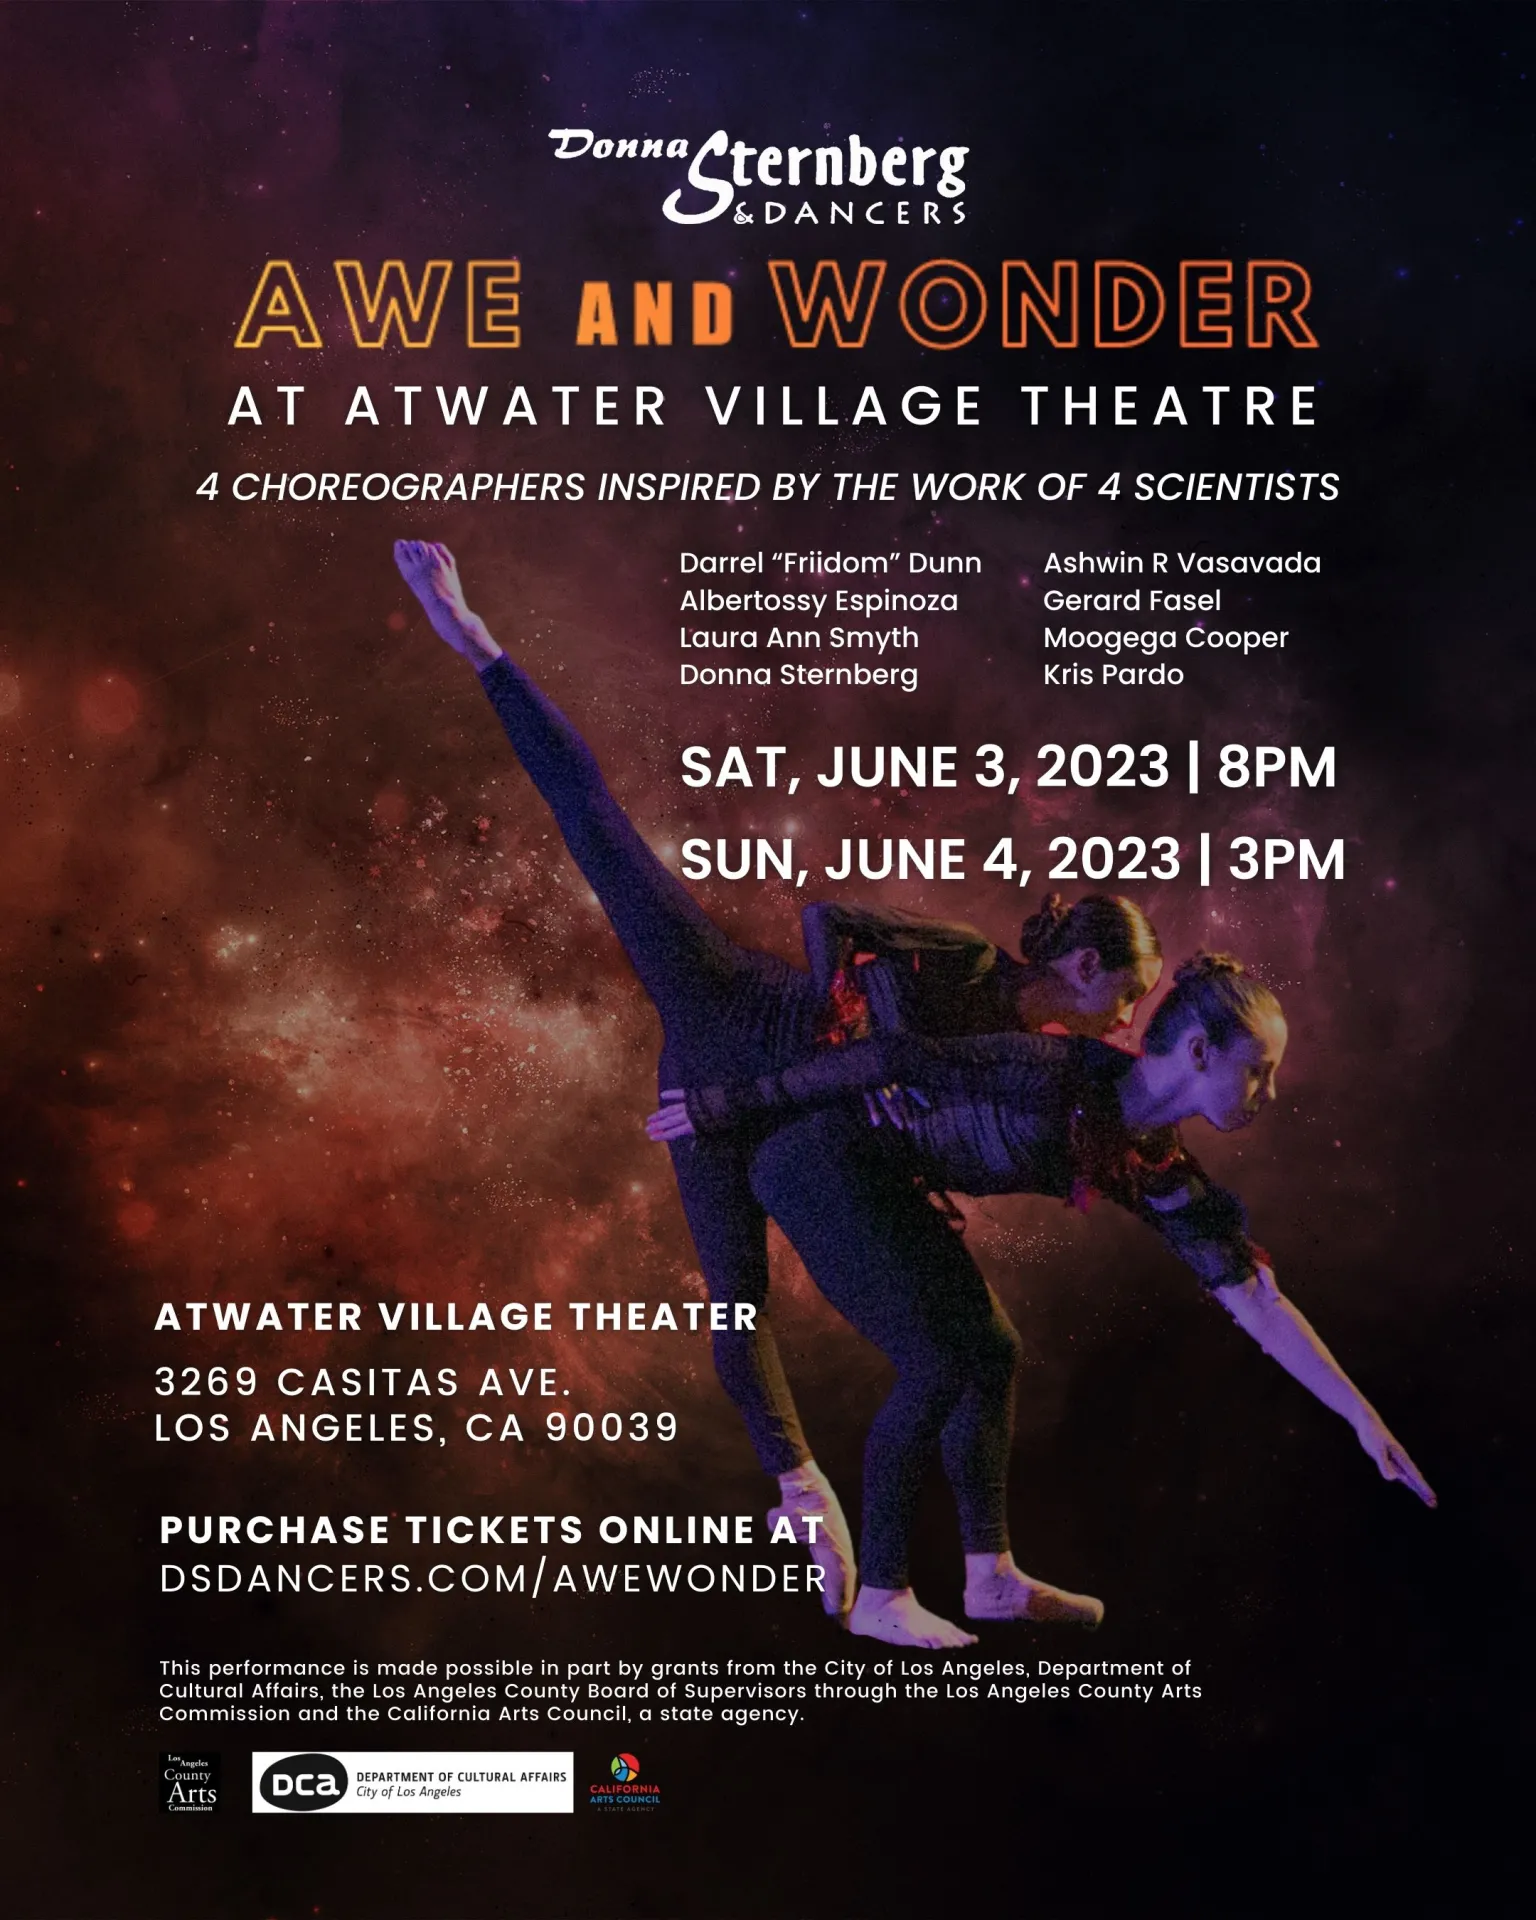 Two dancers surrounded by a galaxy. Flyer promoting Awe & Wonder a dance performance at the Atwater Village Theatre. June 3rd & 4th 